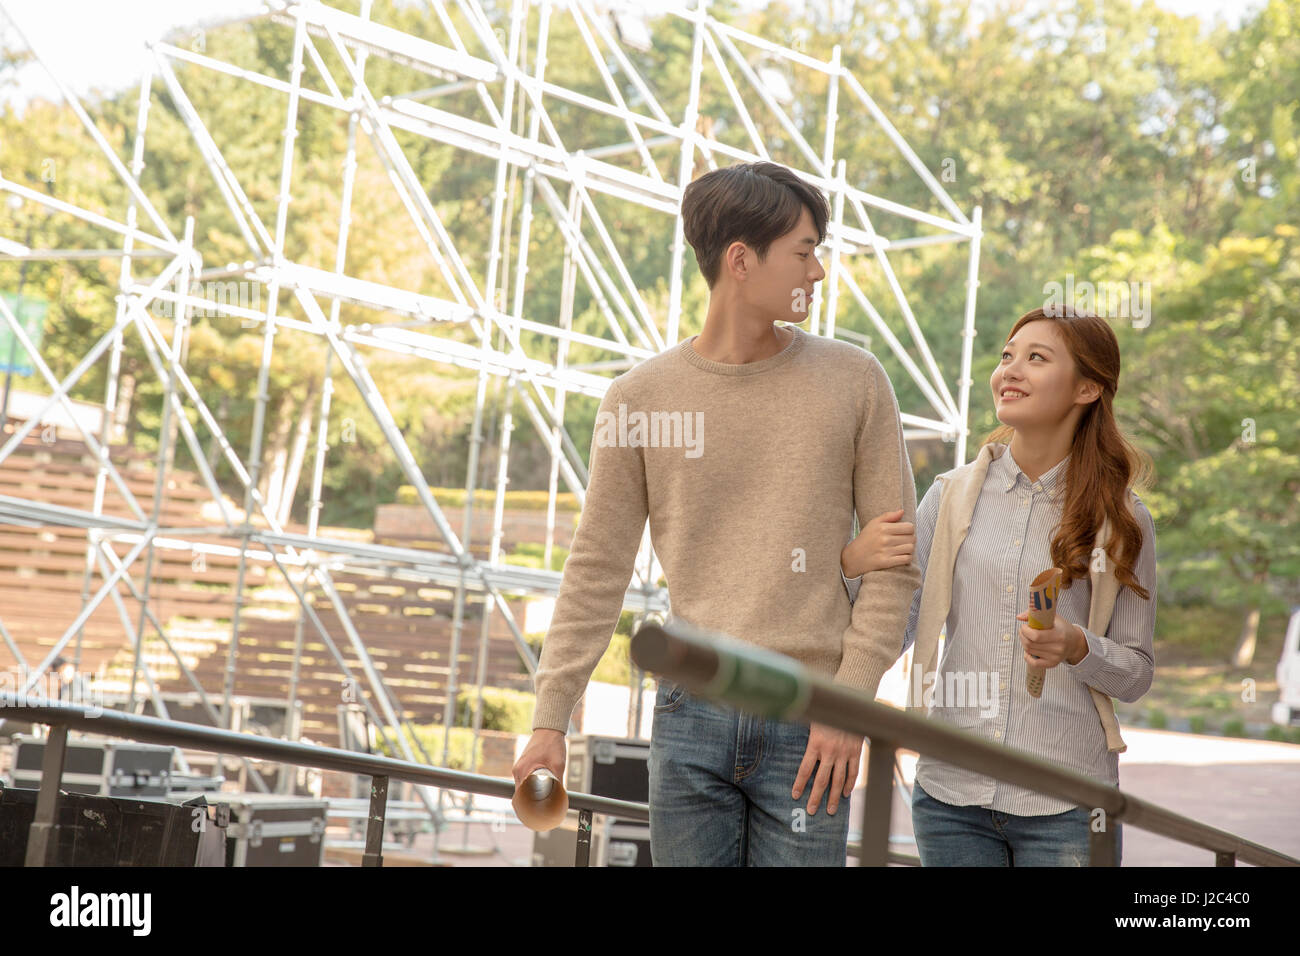 Young smiling couple having a date Stock Photo